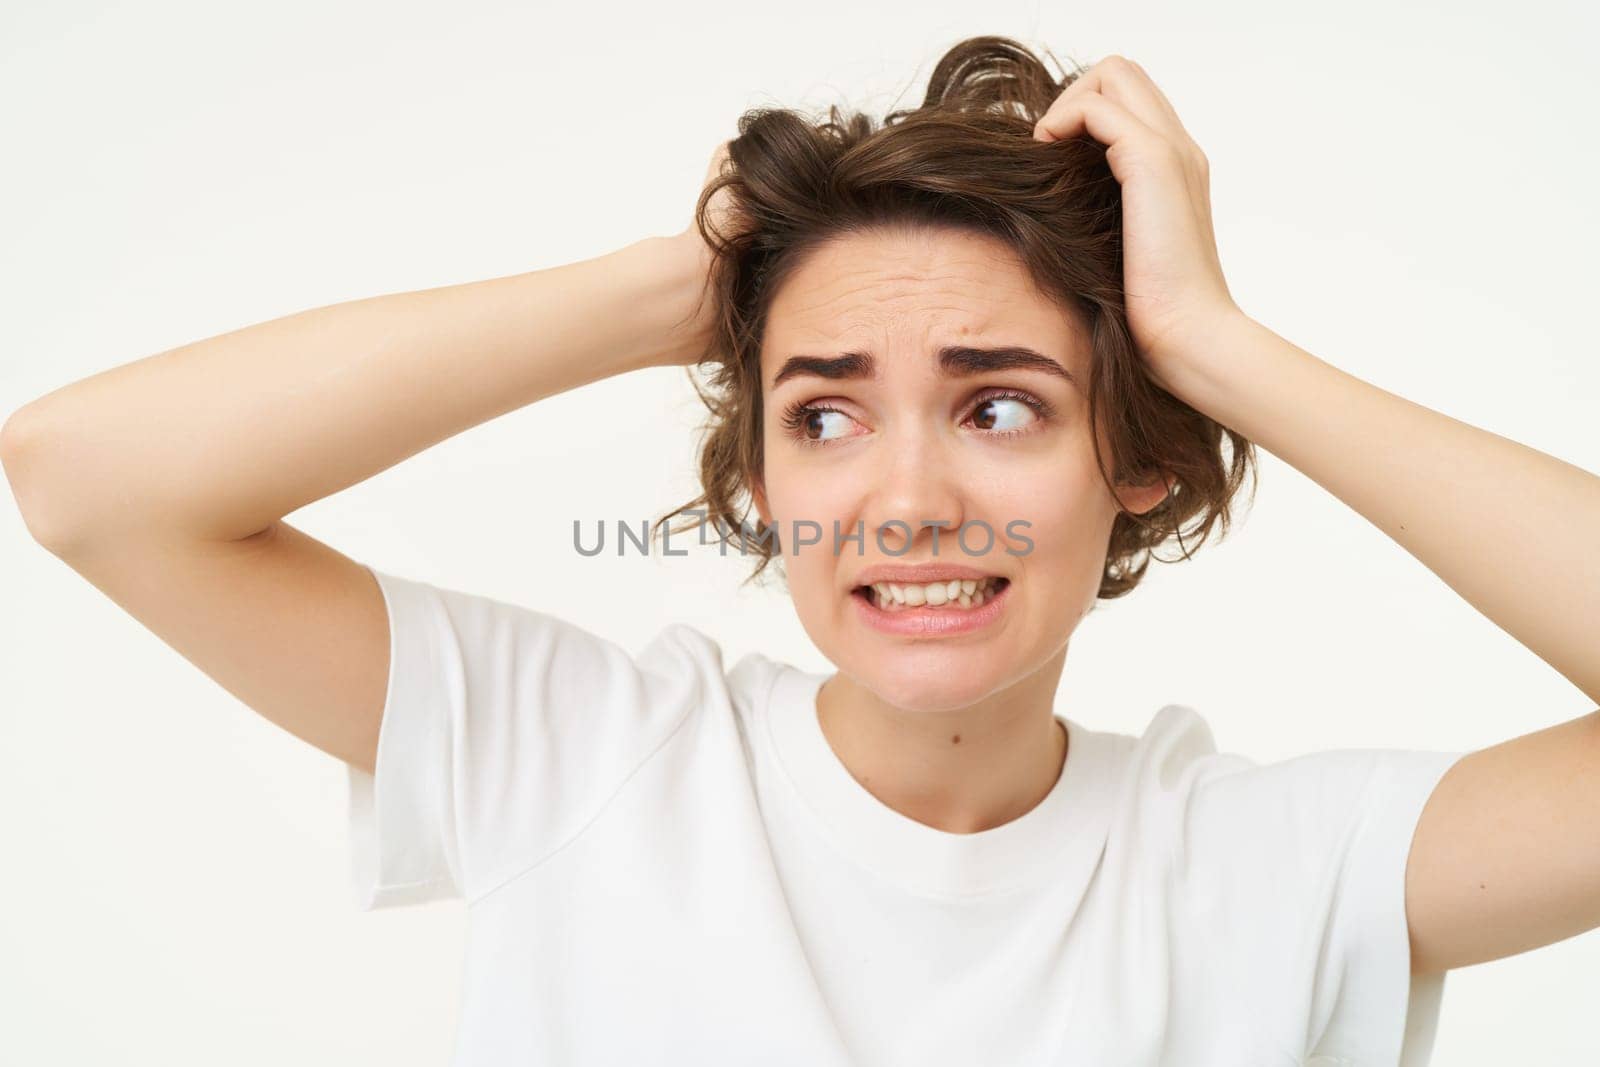 Close up of woman in panic, holding hands on head and clenching teeth, looking troubled, puzzled and frustrated by something, standing over white background.